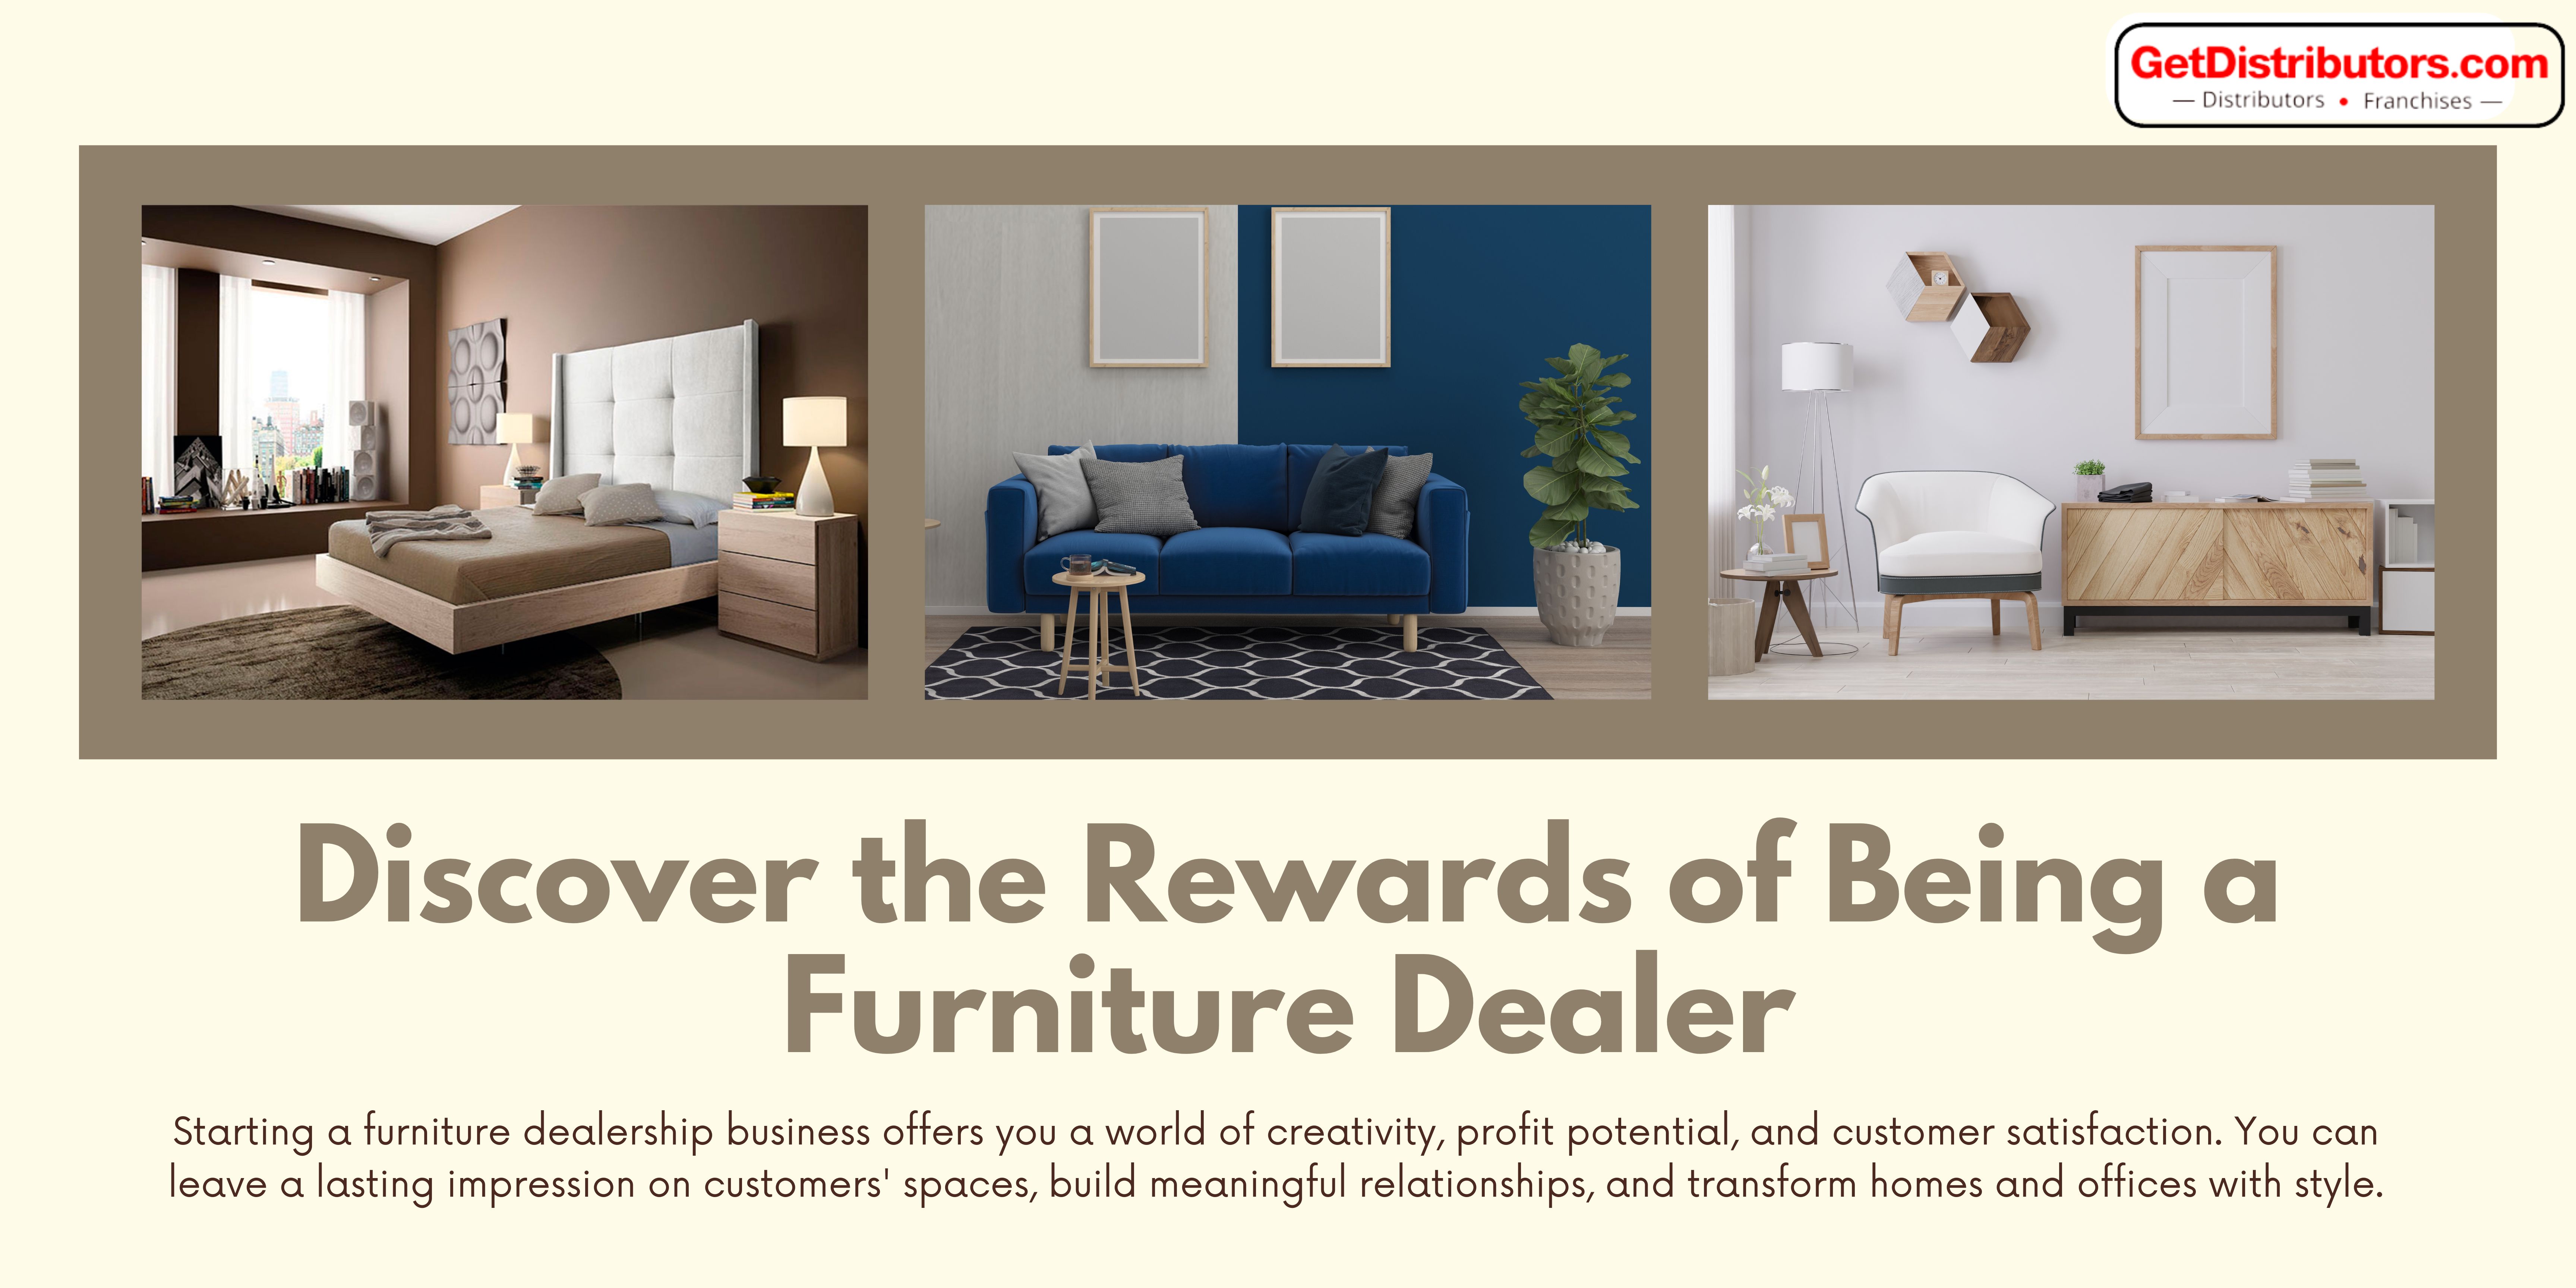 Discover the Rewards of Being a Furniture Dealer